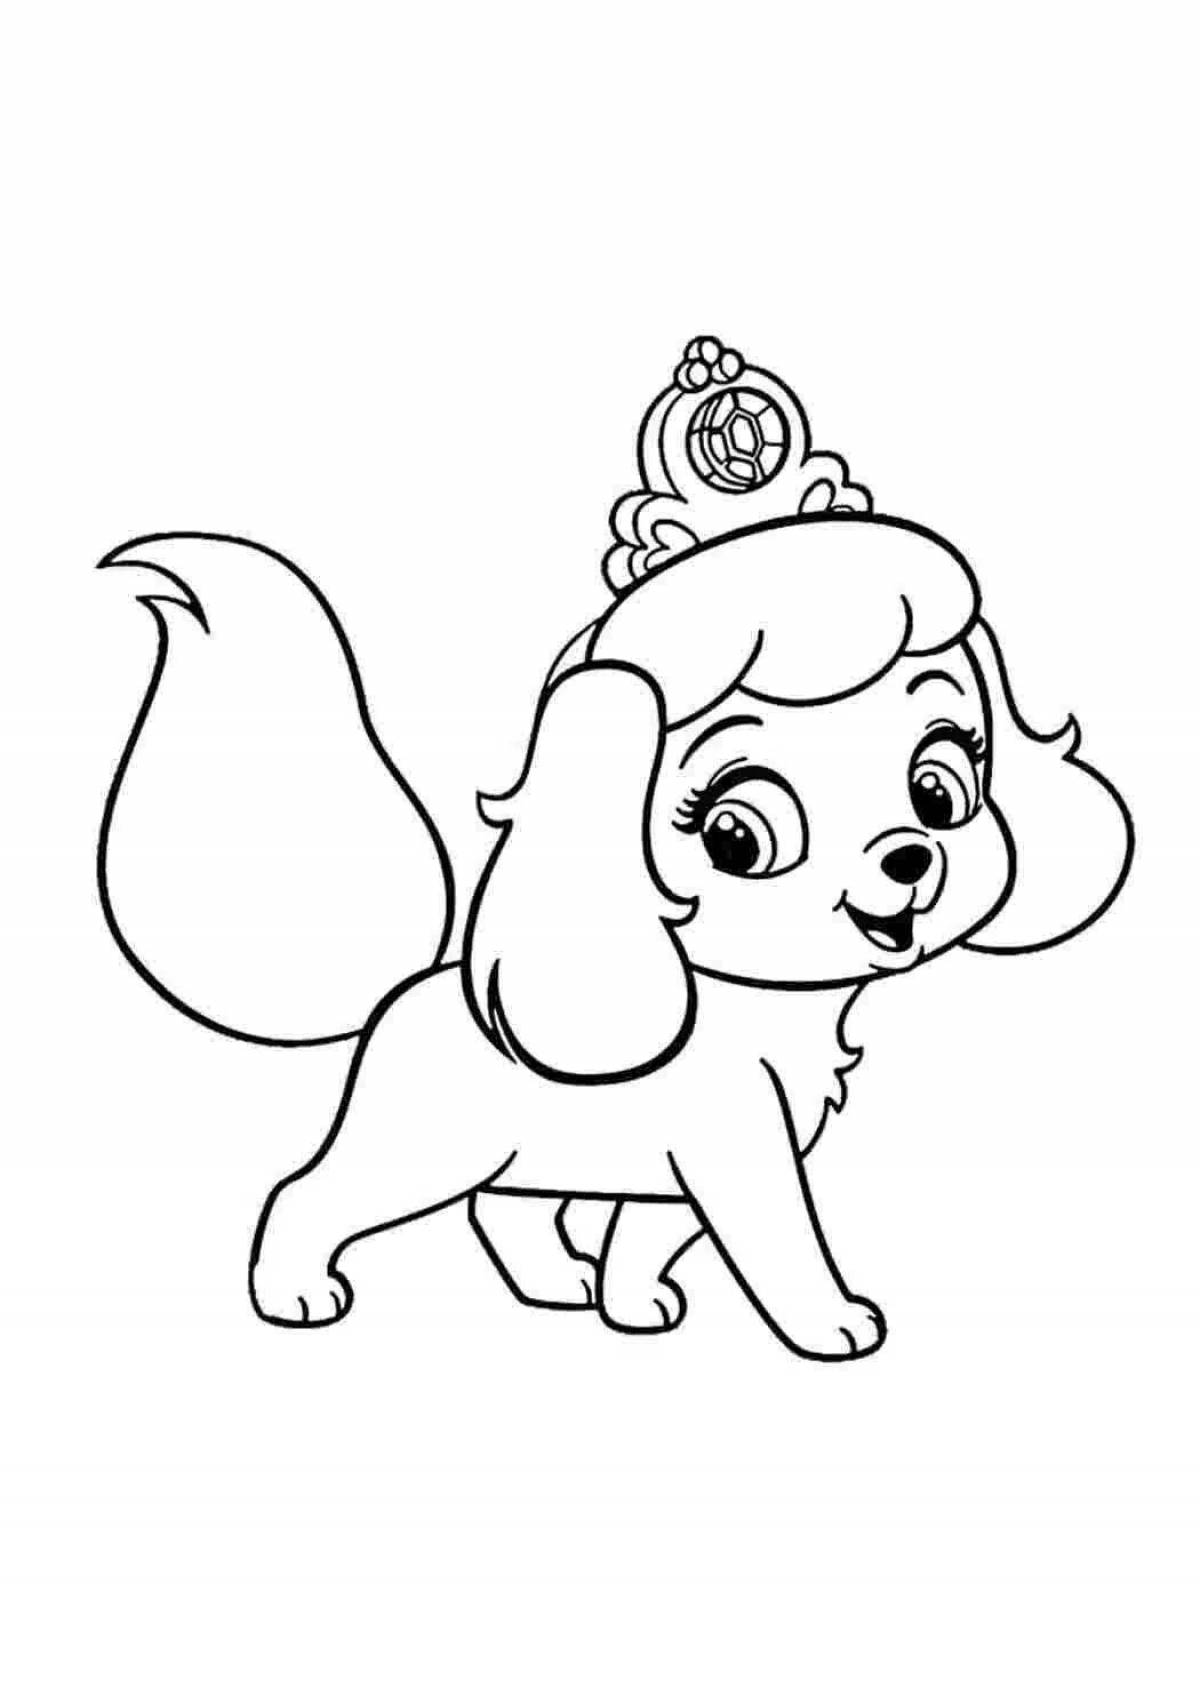 Coloring page for puppy girls